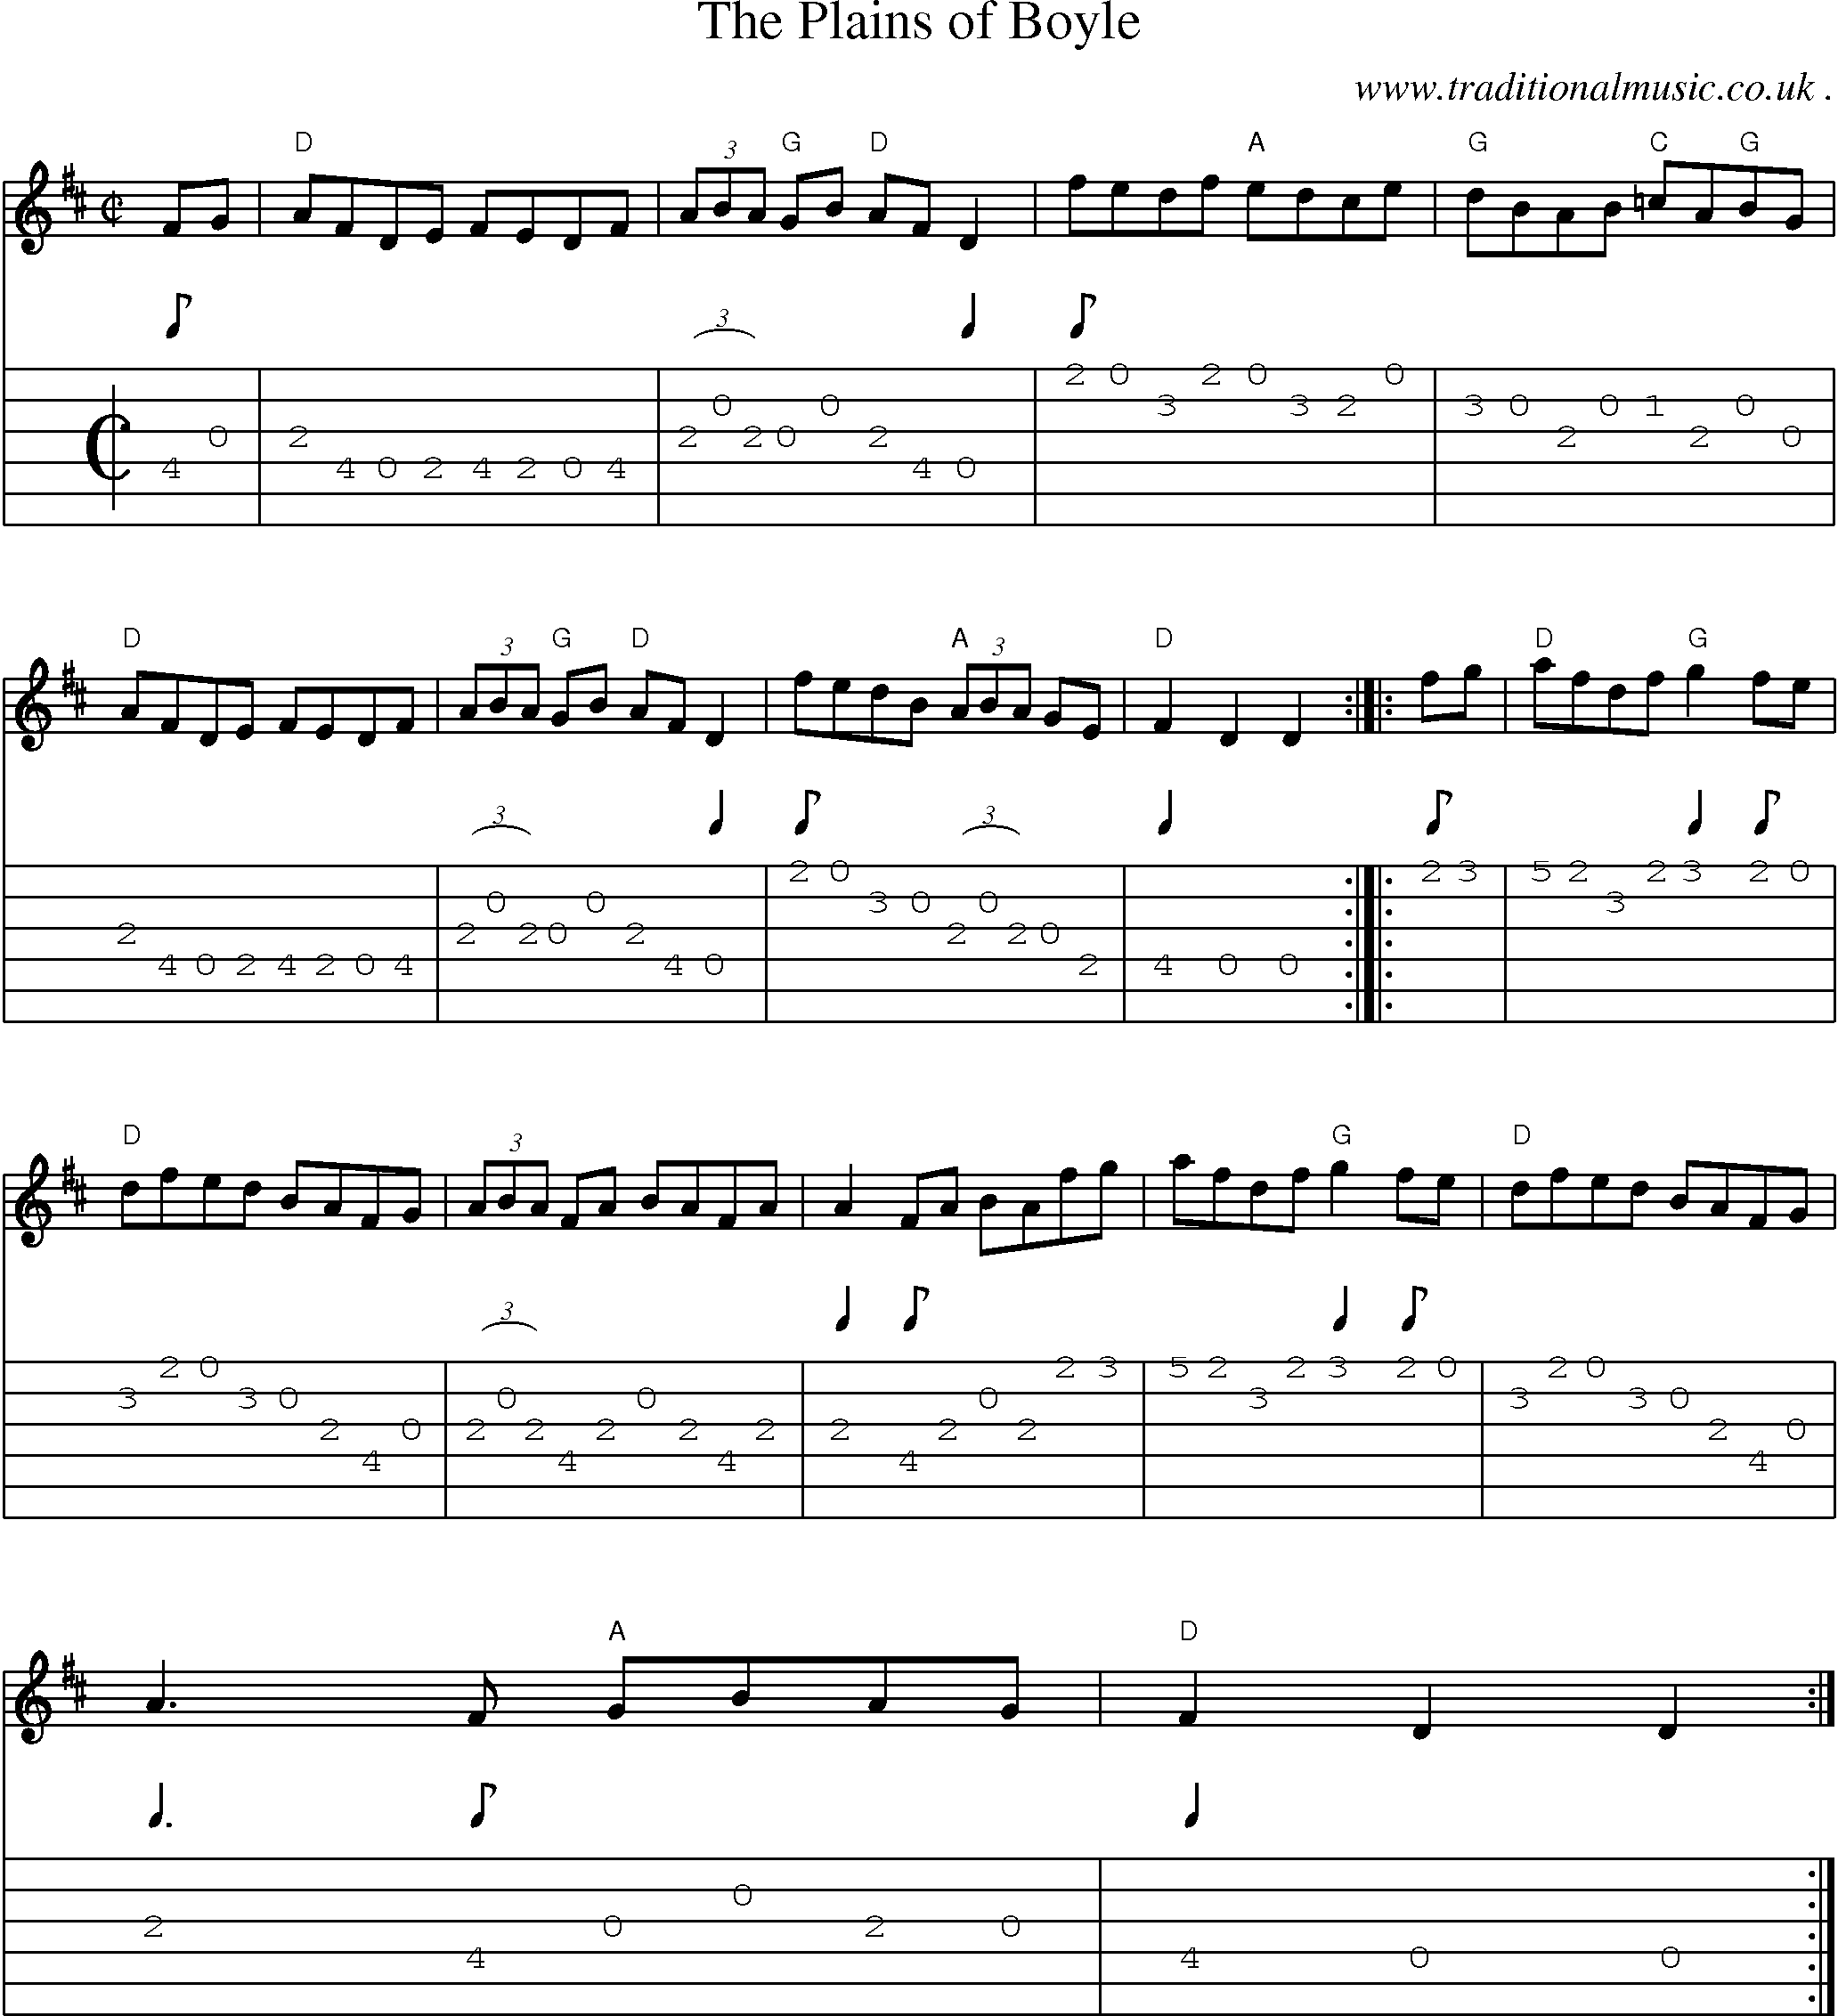 Music Score and Guitar Tabs for The Plains Of Boyle